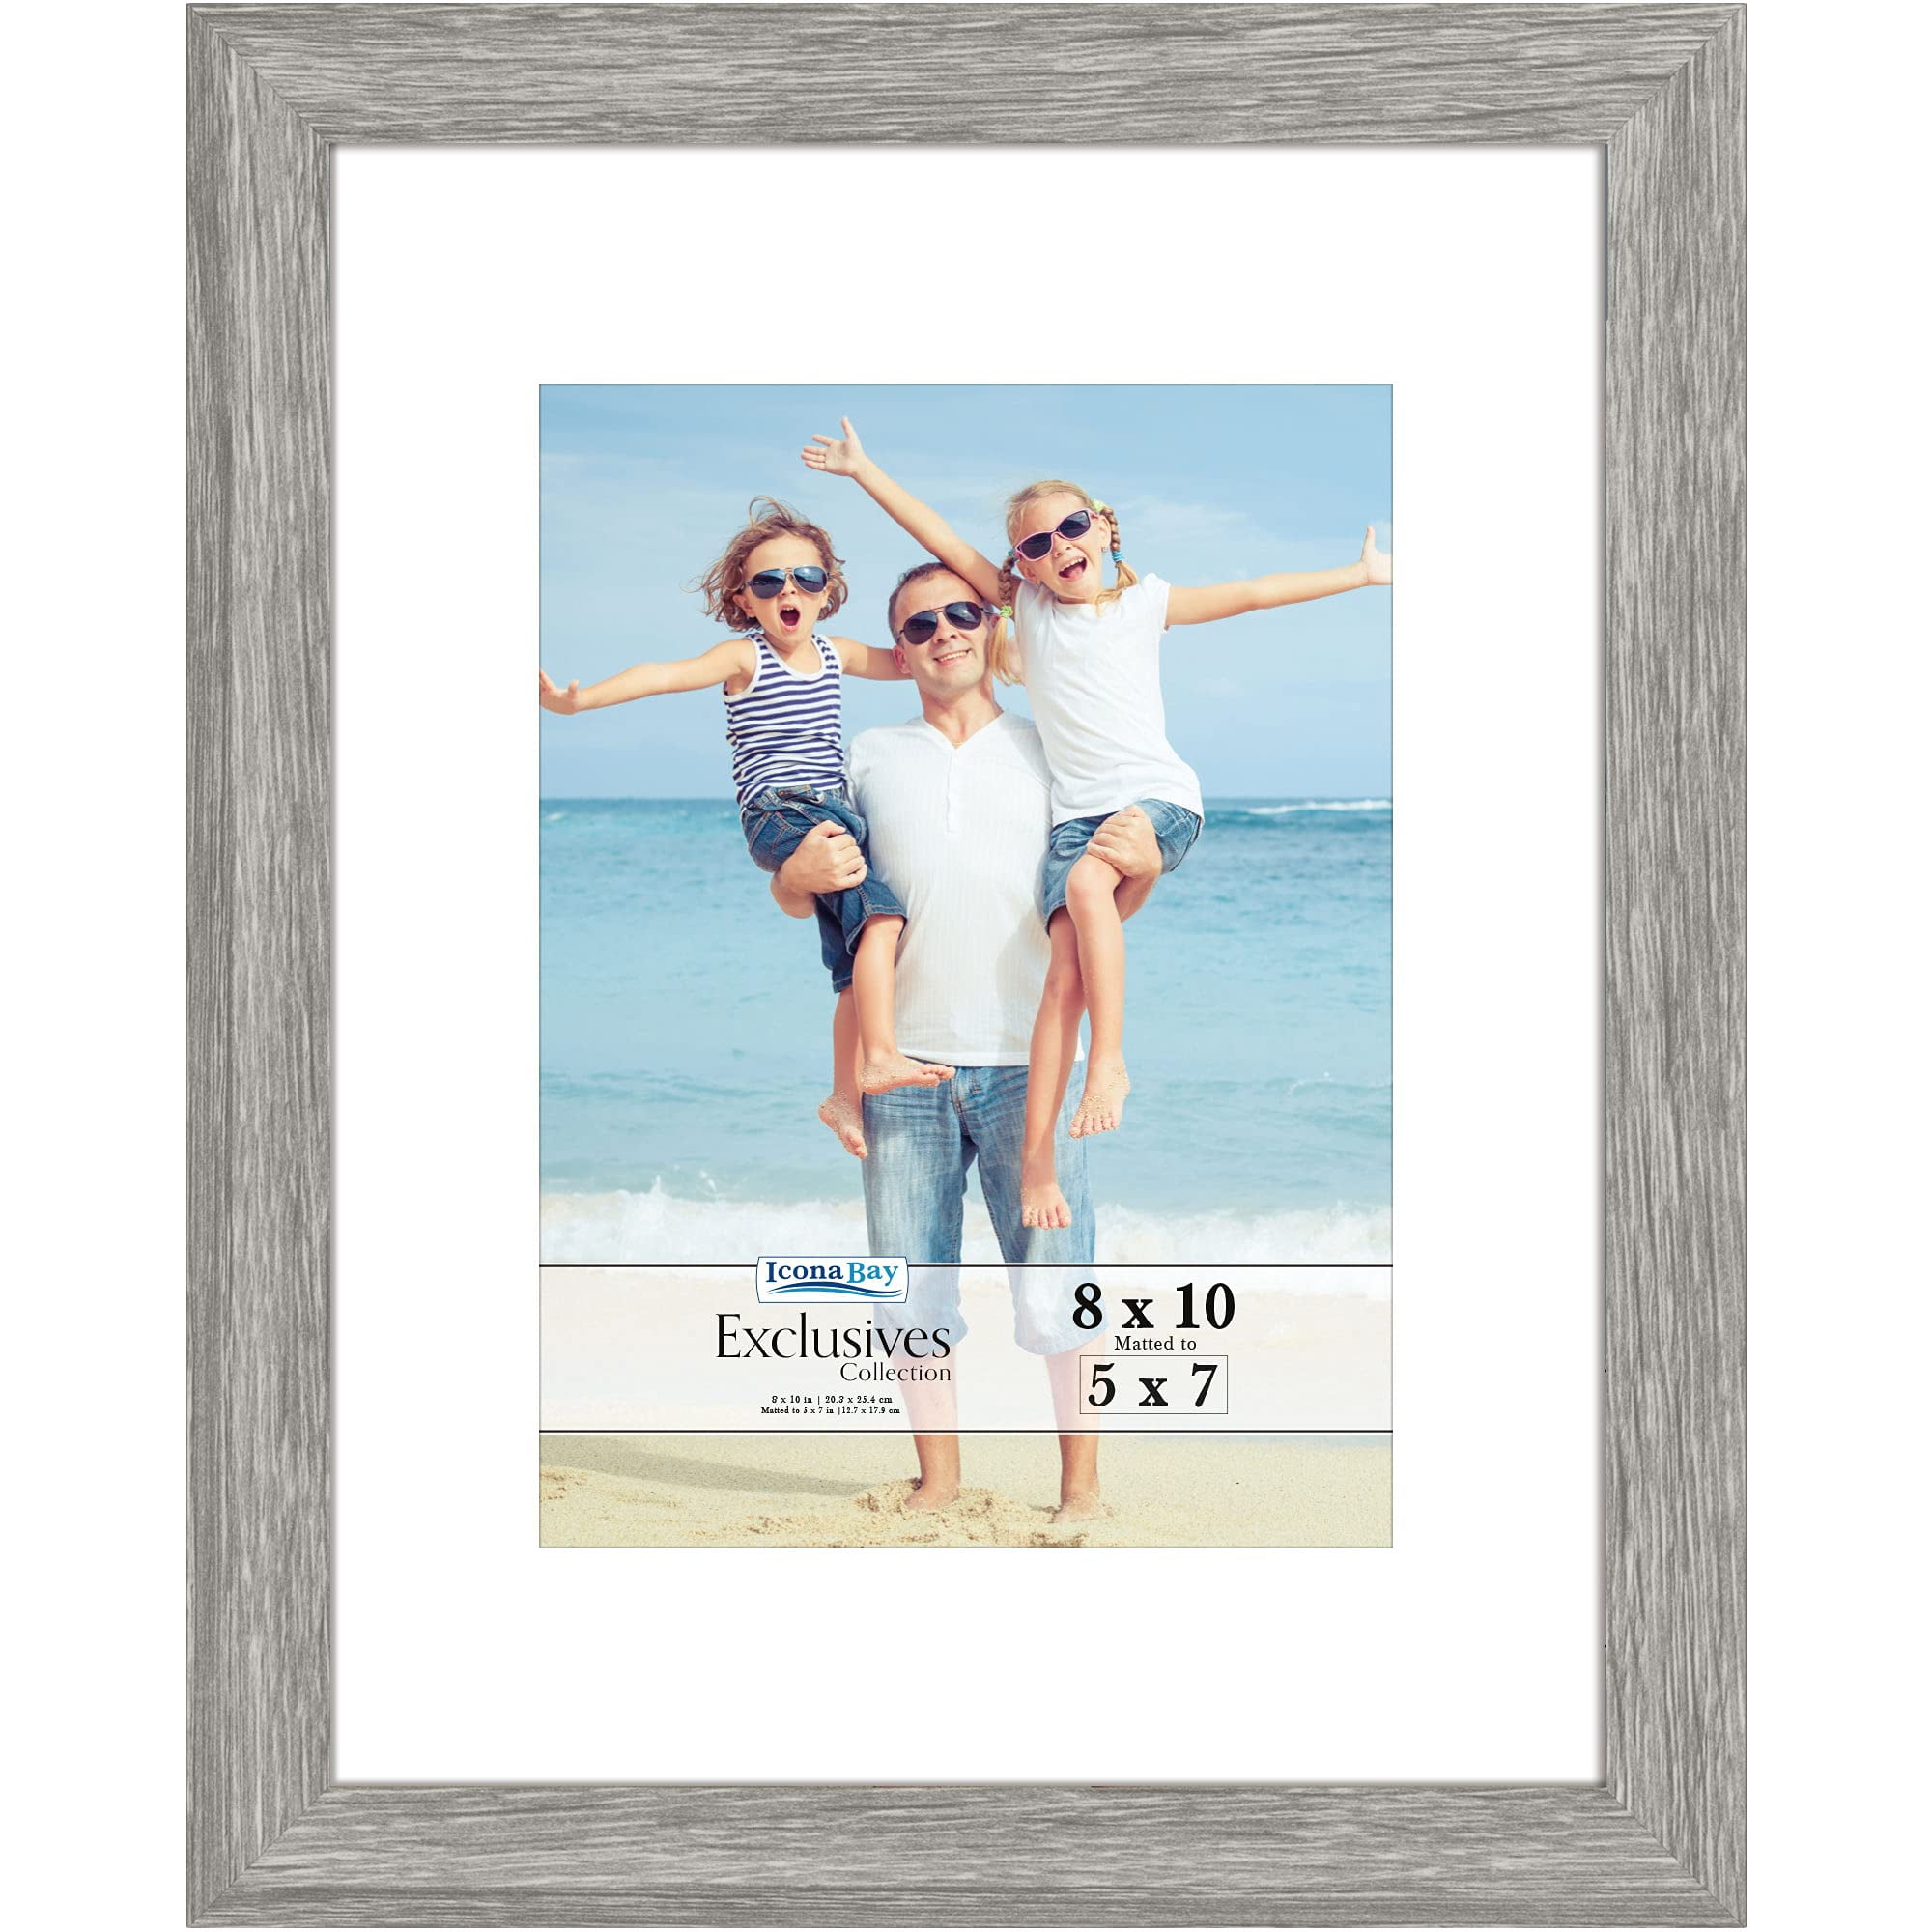  Icona Bay 8x10 Light Oak Picture Frame with Removable Mat for  5x7 Photo, Modern Style Wood Composite Frame, Table Top or Wall Mount,  Bliss Collection